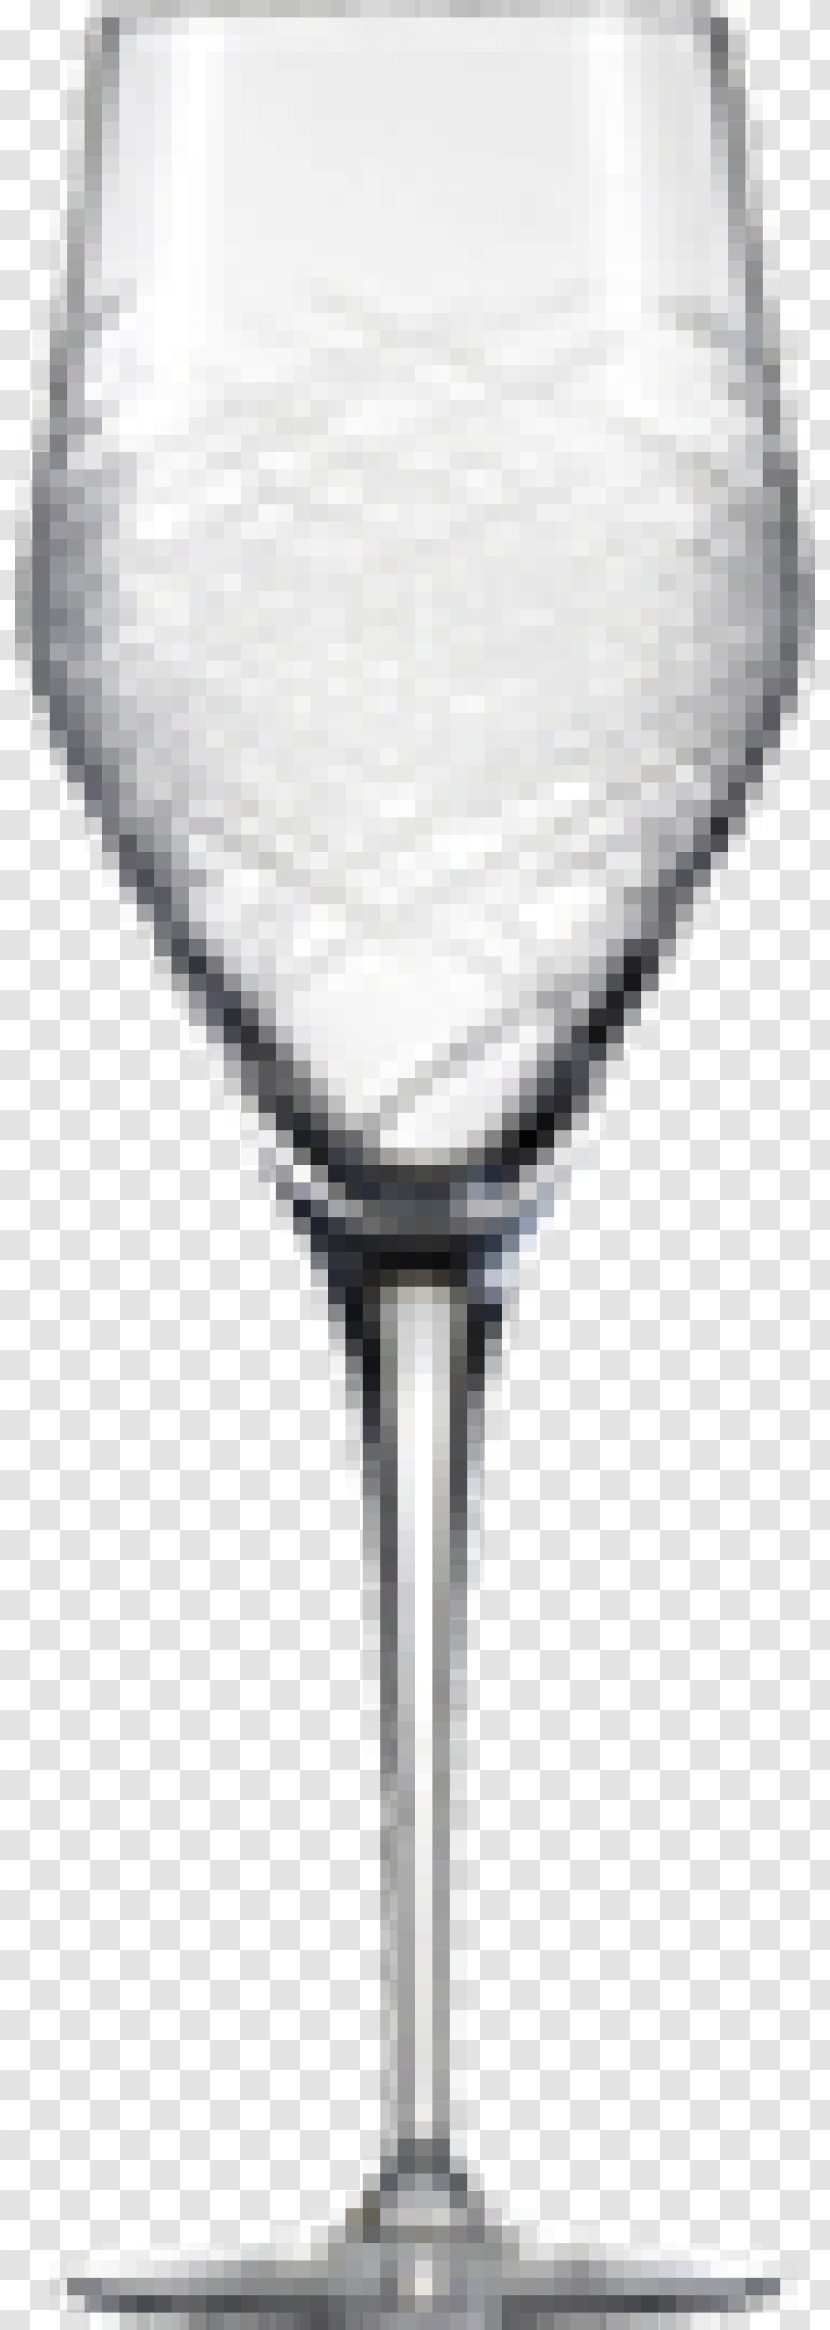 Wine Glass Champagne Table-glass Cocktail - Glasses Transparent PNG